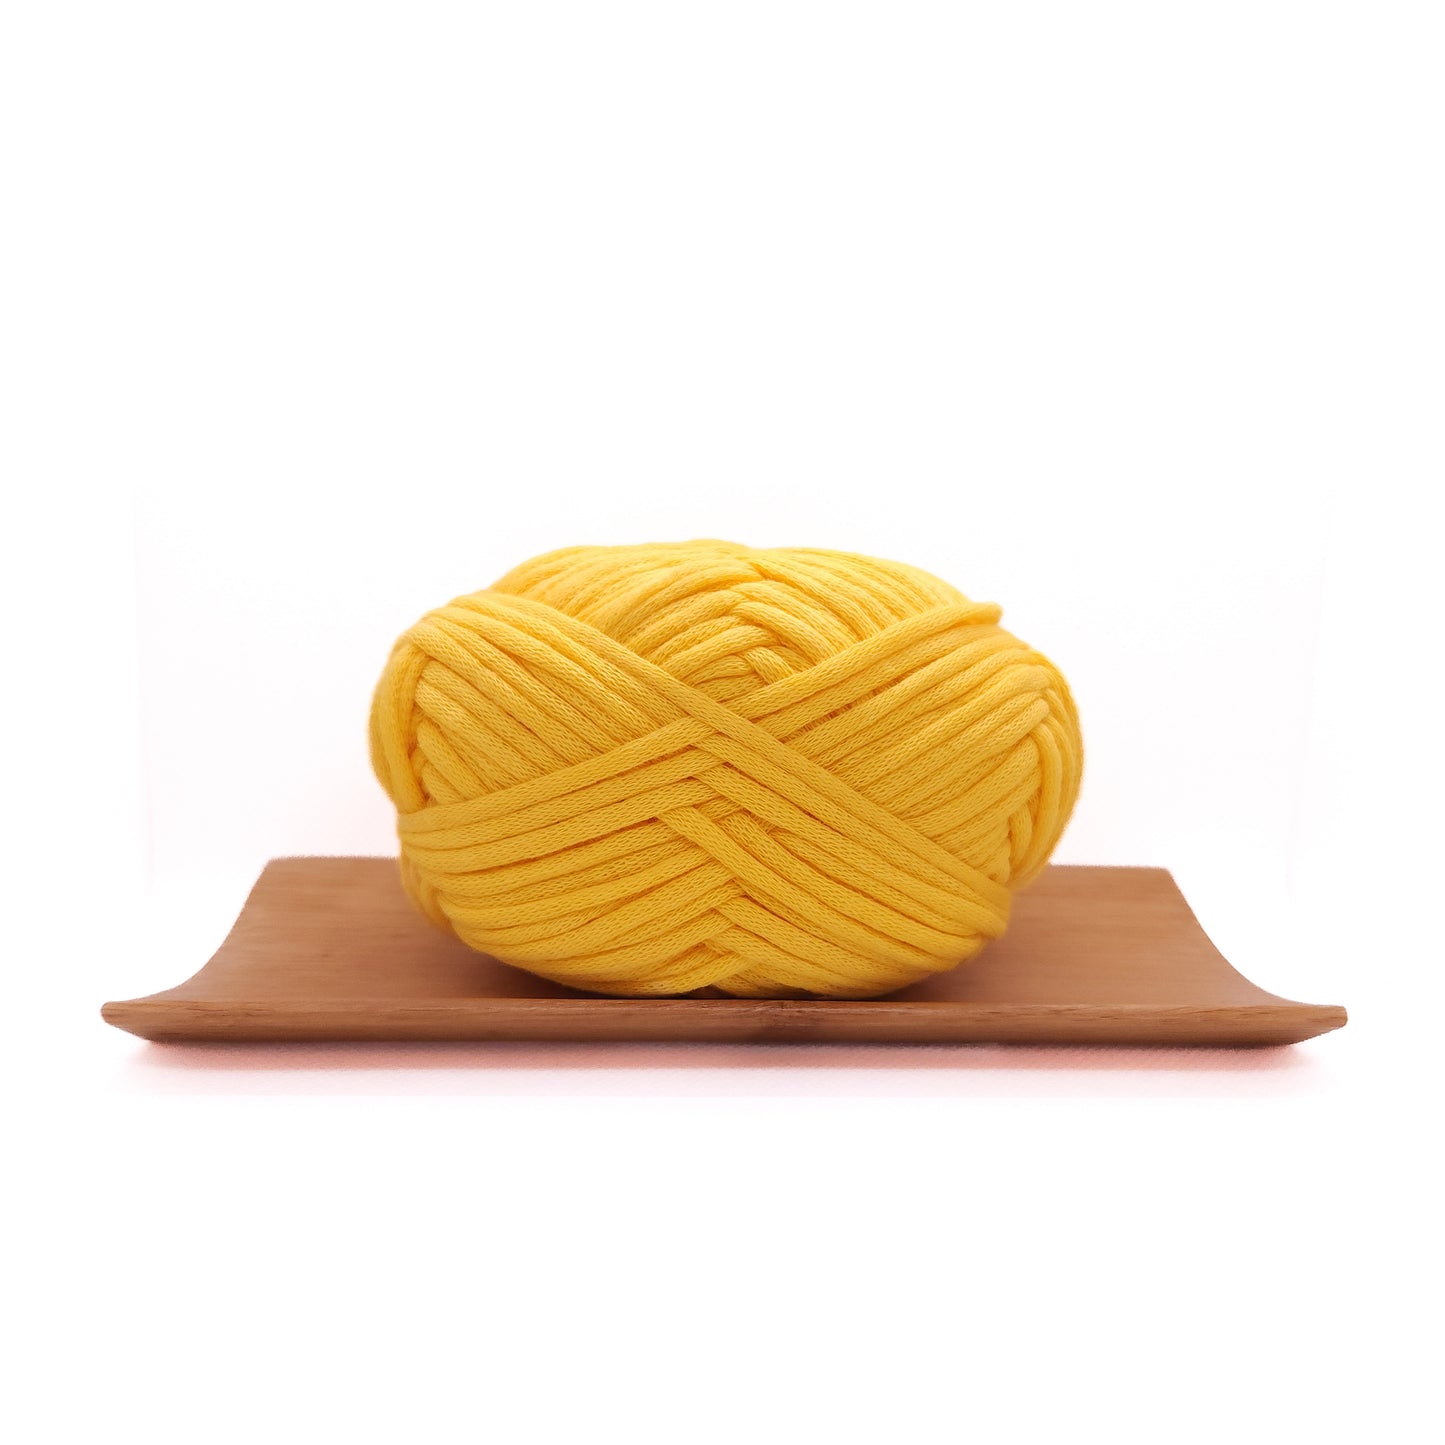 A skein of sunshine yellow coloured yarn for crochet beginners.